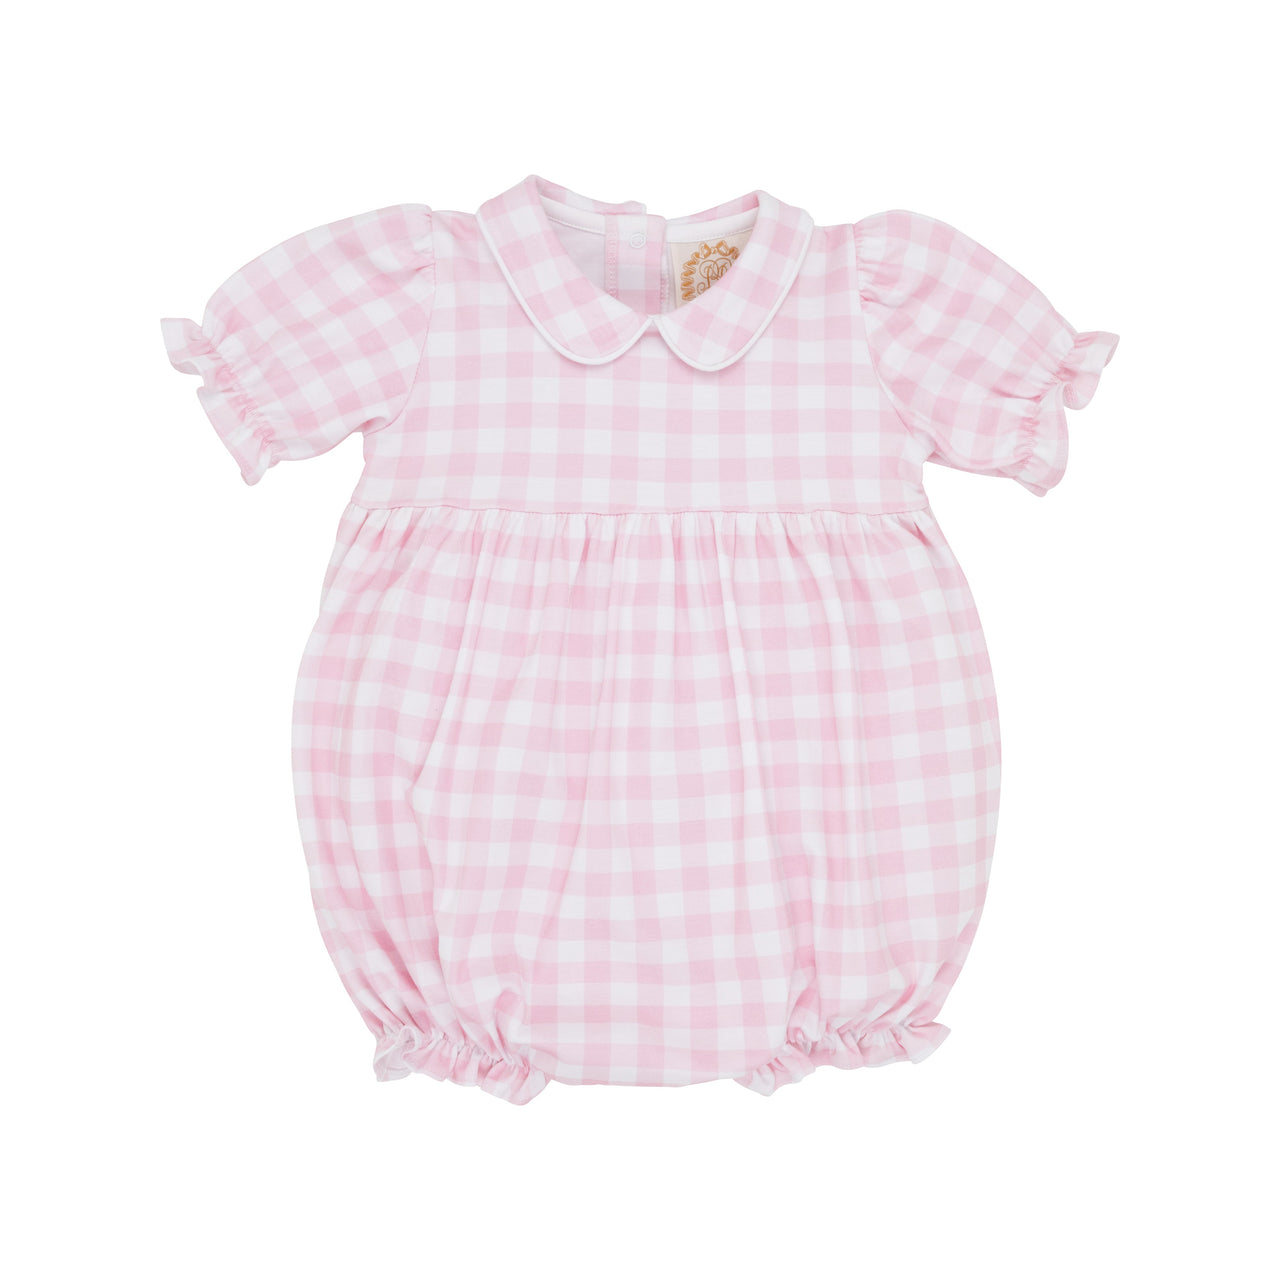 Britt Bubble | Palm Beach Pink Gingham With Worth Avenue White